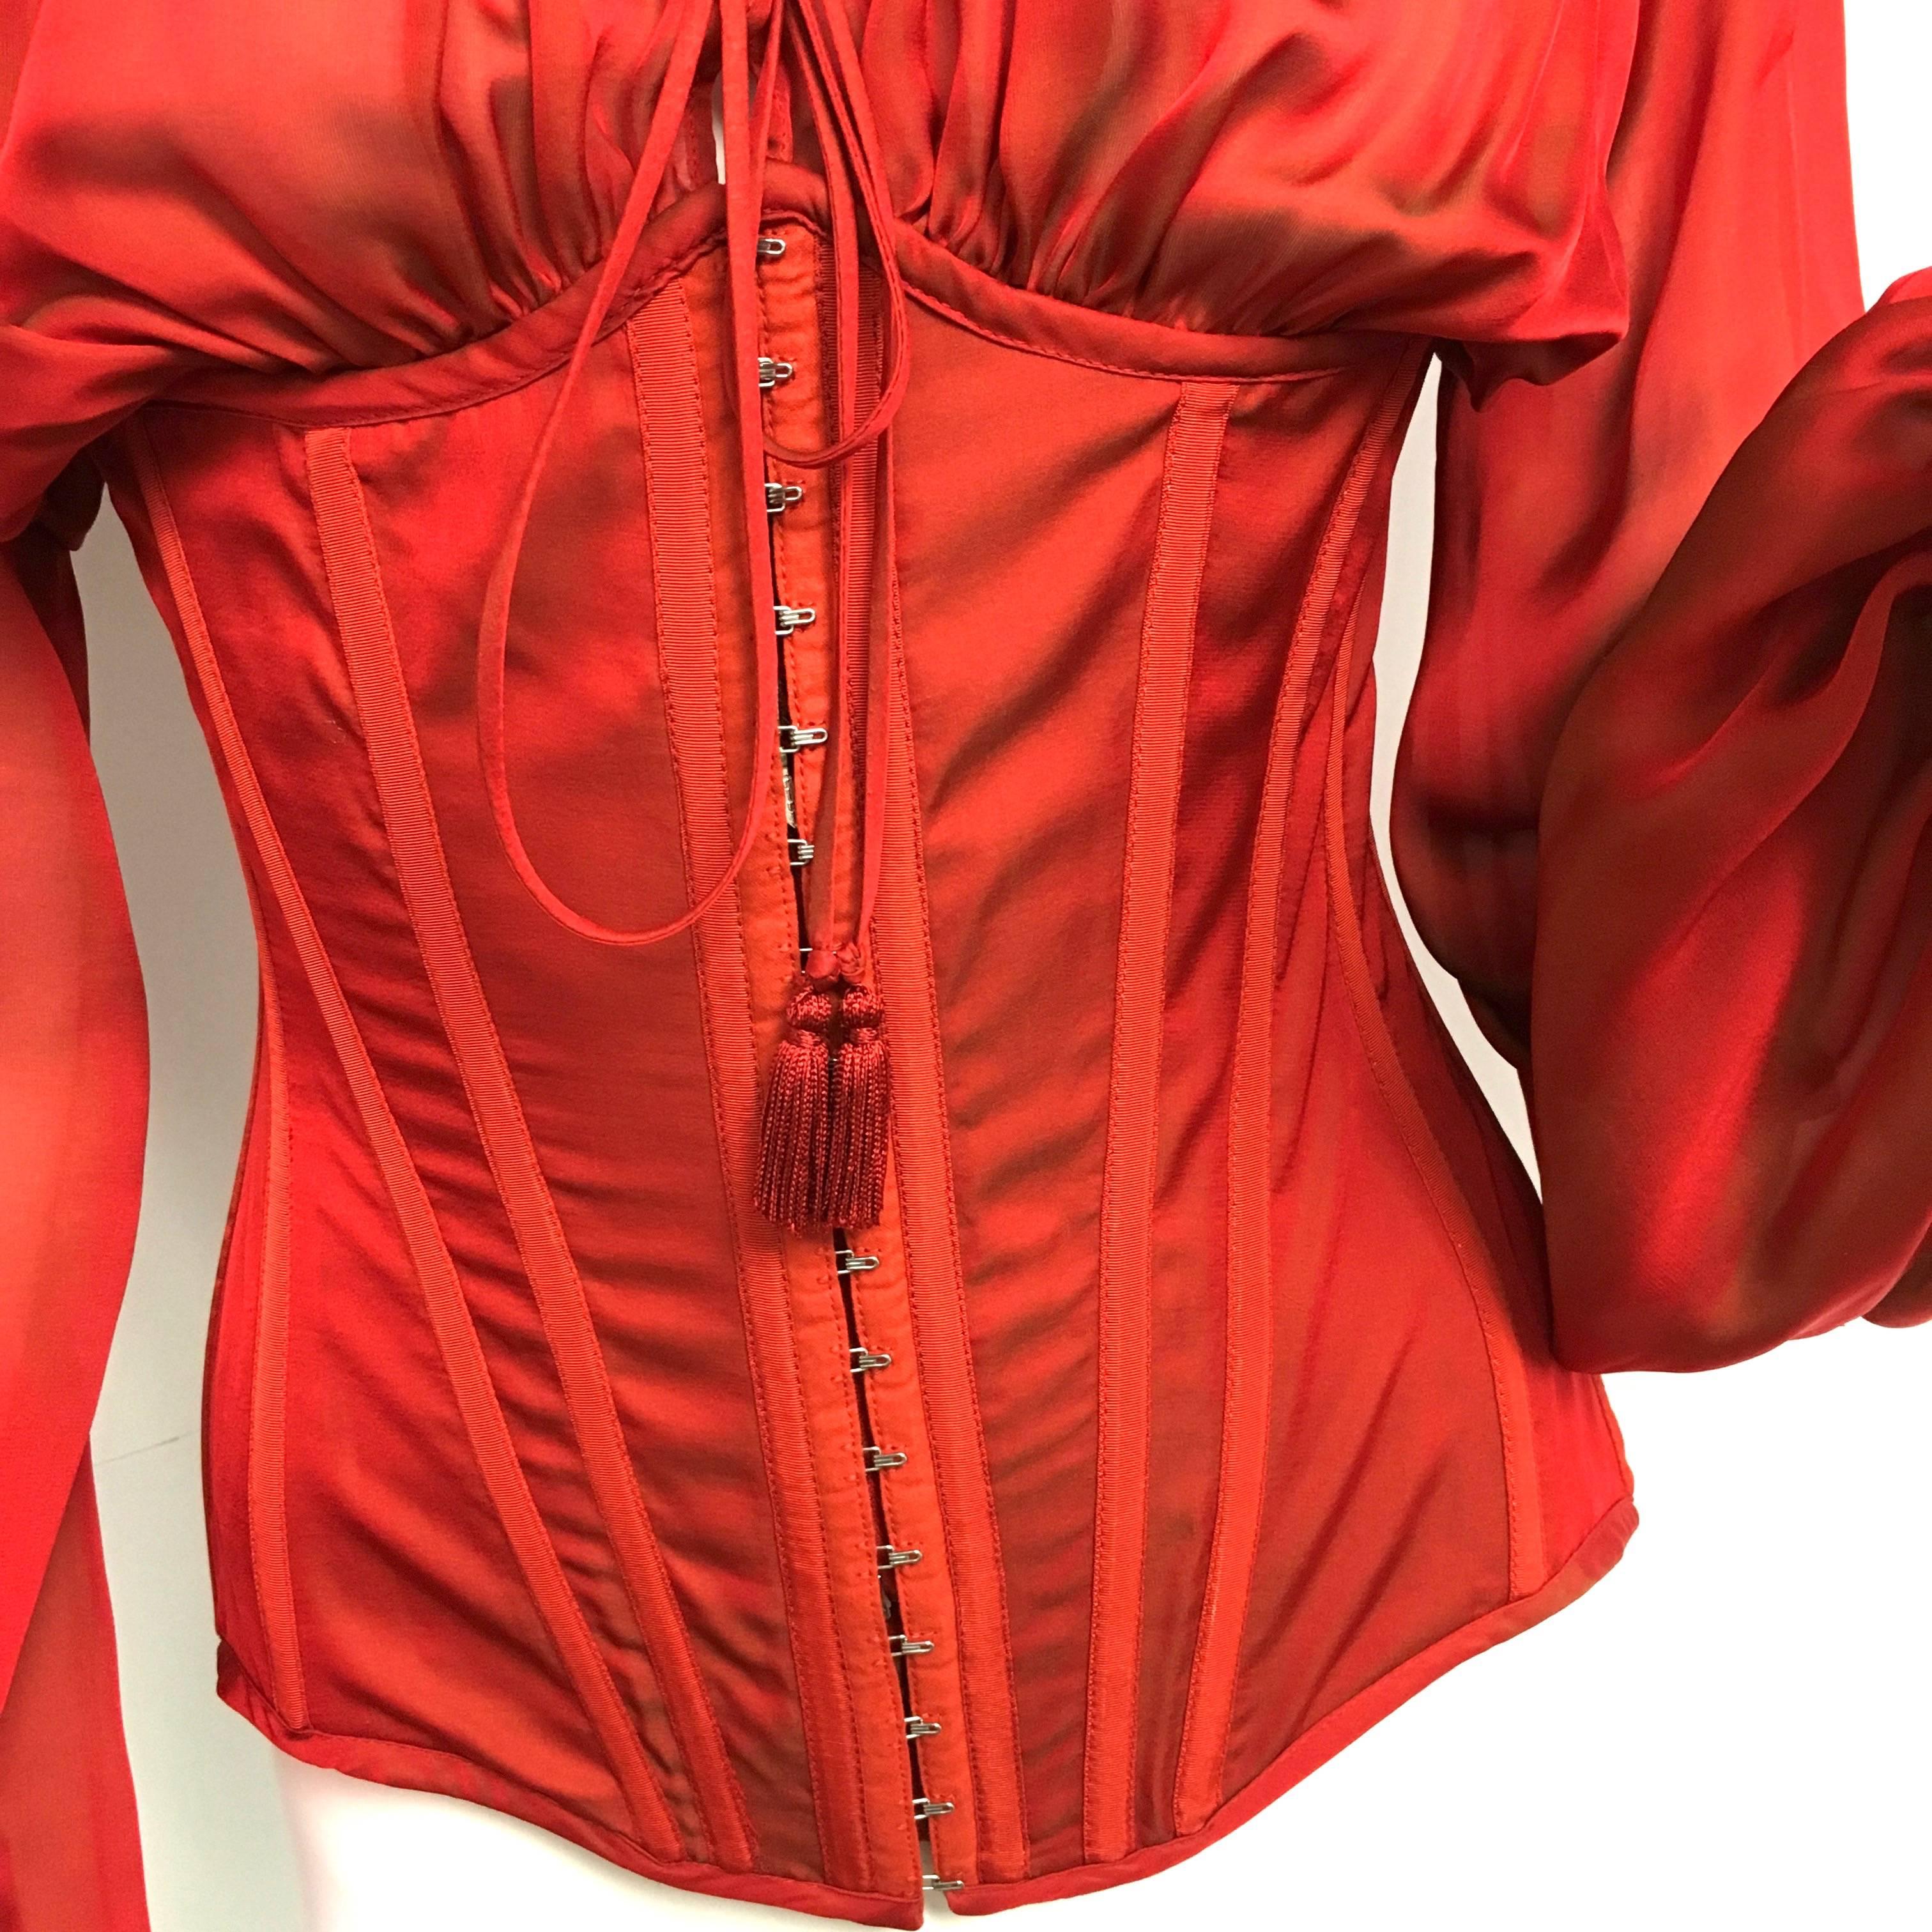 Rare Jean Paul Gaultier Lace Up Corset Irridescent Red Silk Blouse. 
New with Tag.
Size: 38 ITA / 2 US

STYLE: Corset Blouse
CLOSURE: Front Zipper Metal Hooks / Lace up in back
MATERIAL:  100% Silk

Approximate measurements:
Chest -